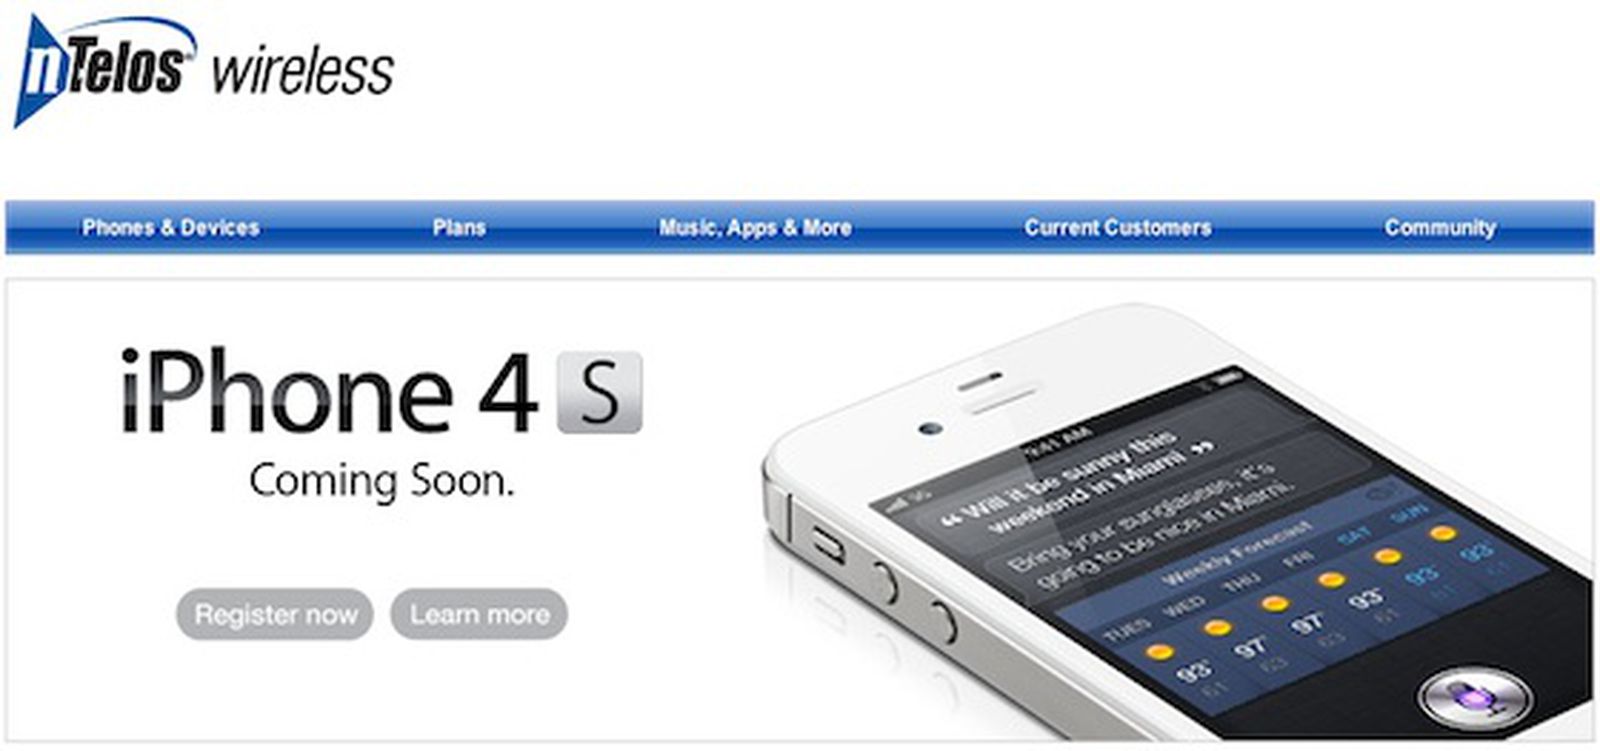 Broad Rollout of iPhone to Small U.S. Carriers Coming on April 20 -  MacRumors